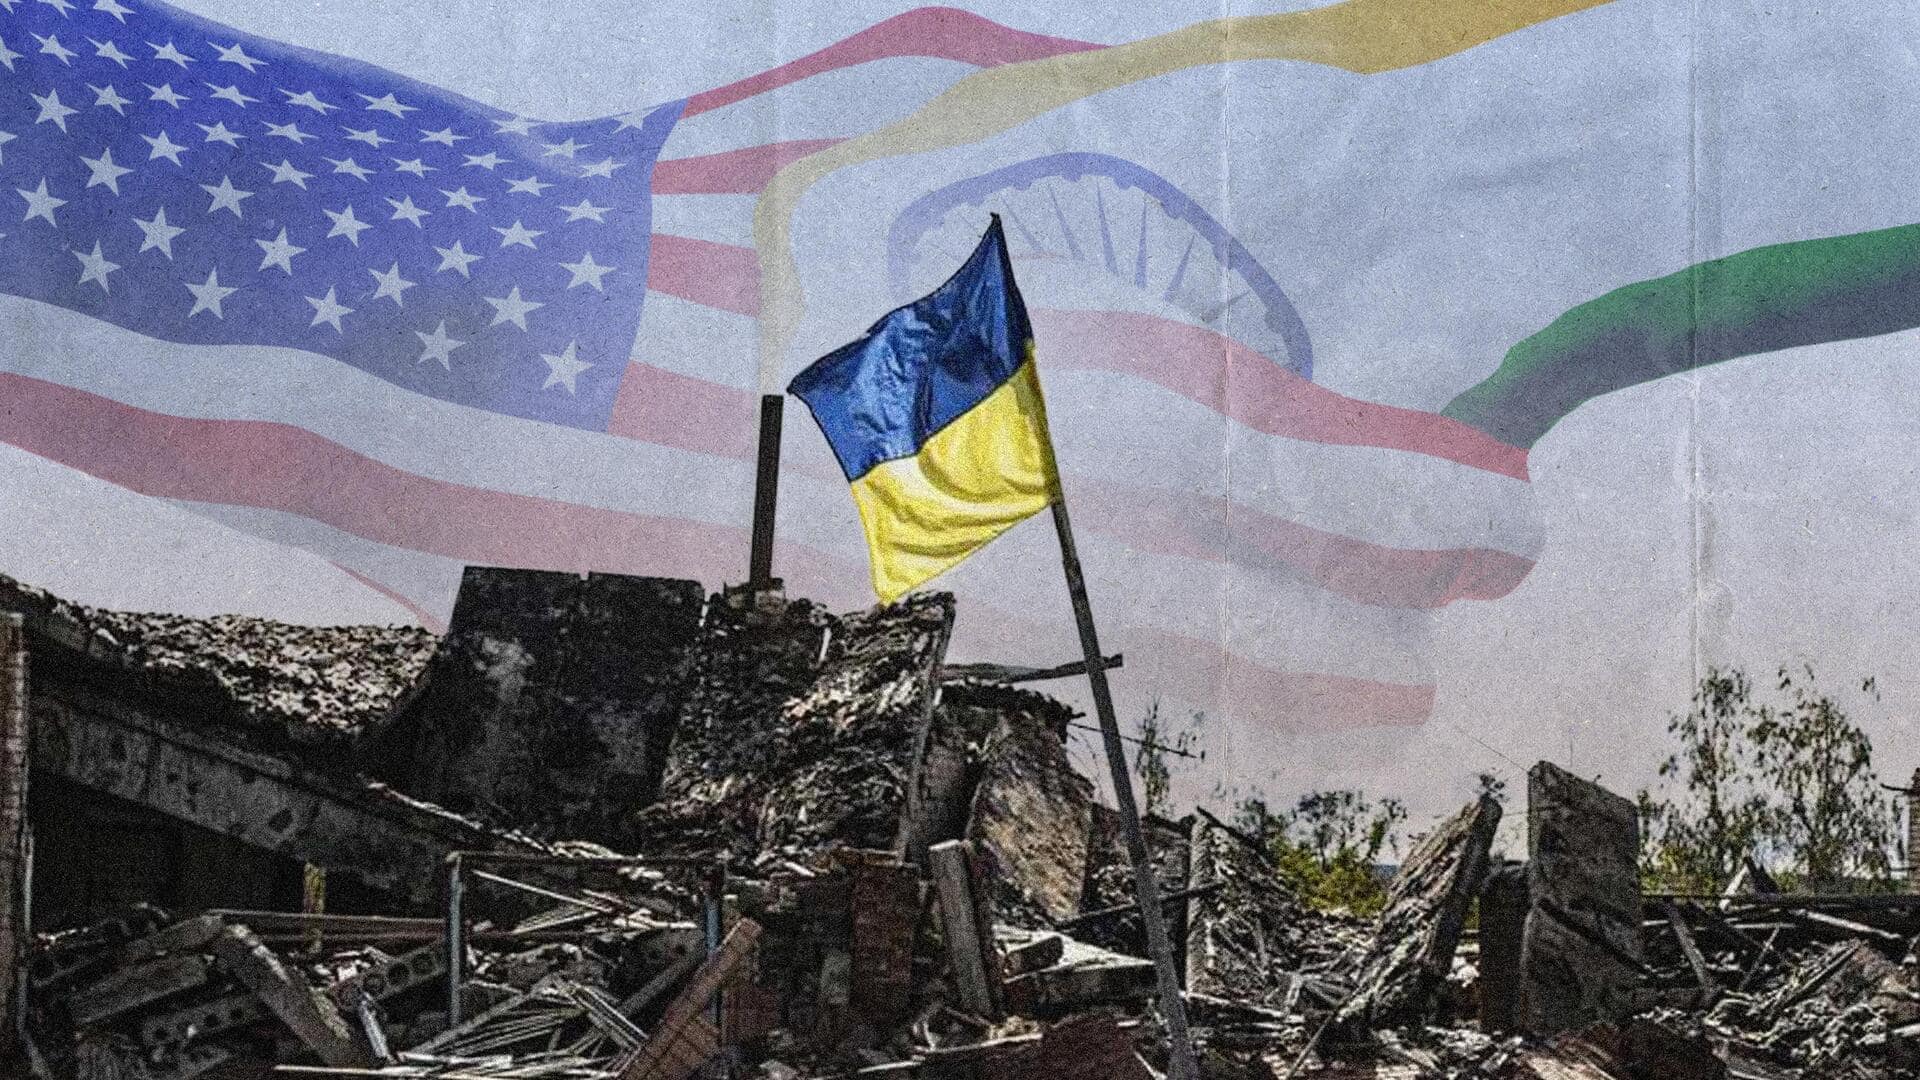 US welcomes India's role in bringing peace to Ukraine